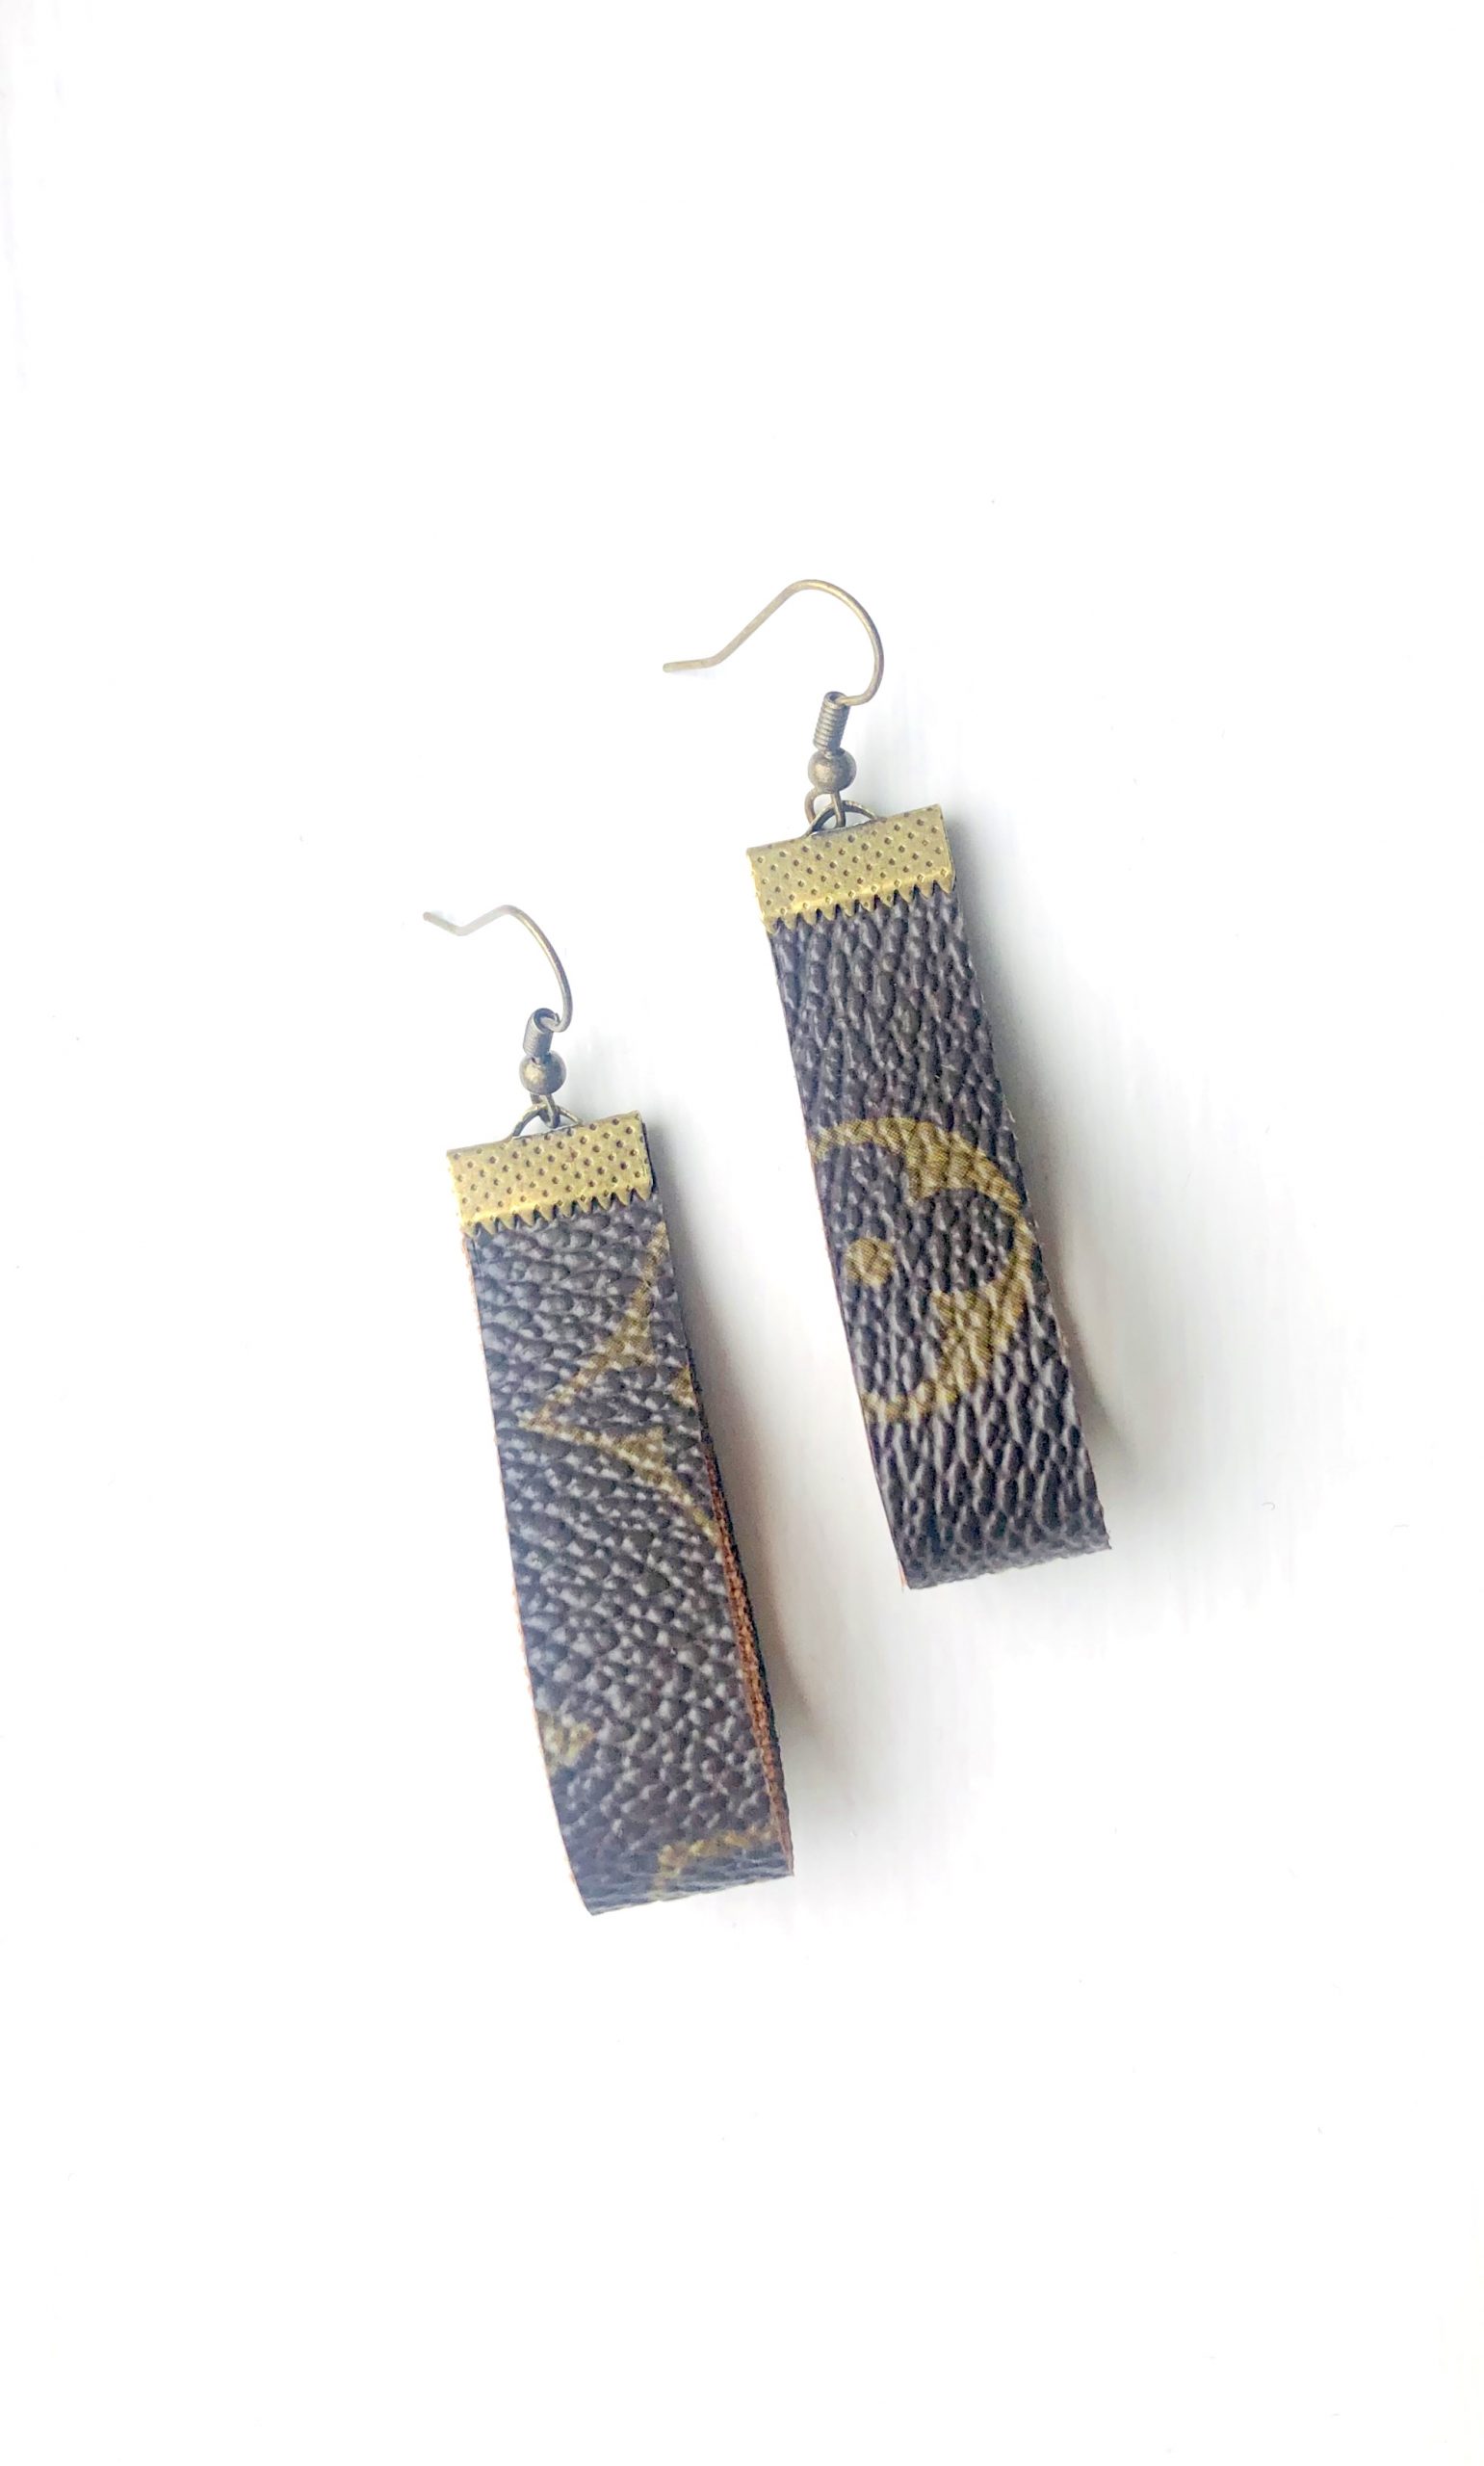 Geometric Genuine Leather Cheetah Print with Authentic Louis Vuitton Canvas  Earrings - Handmade & Curated Jewelry and Accessories by Roz